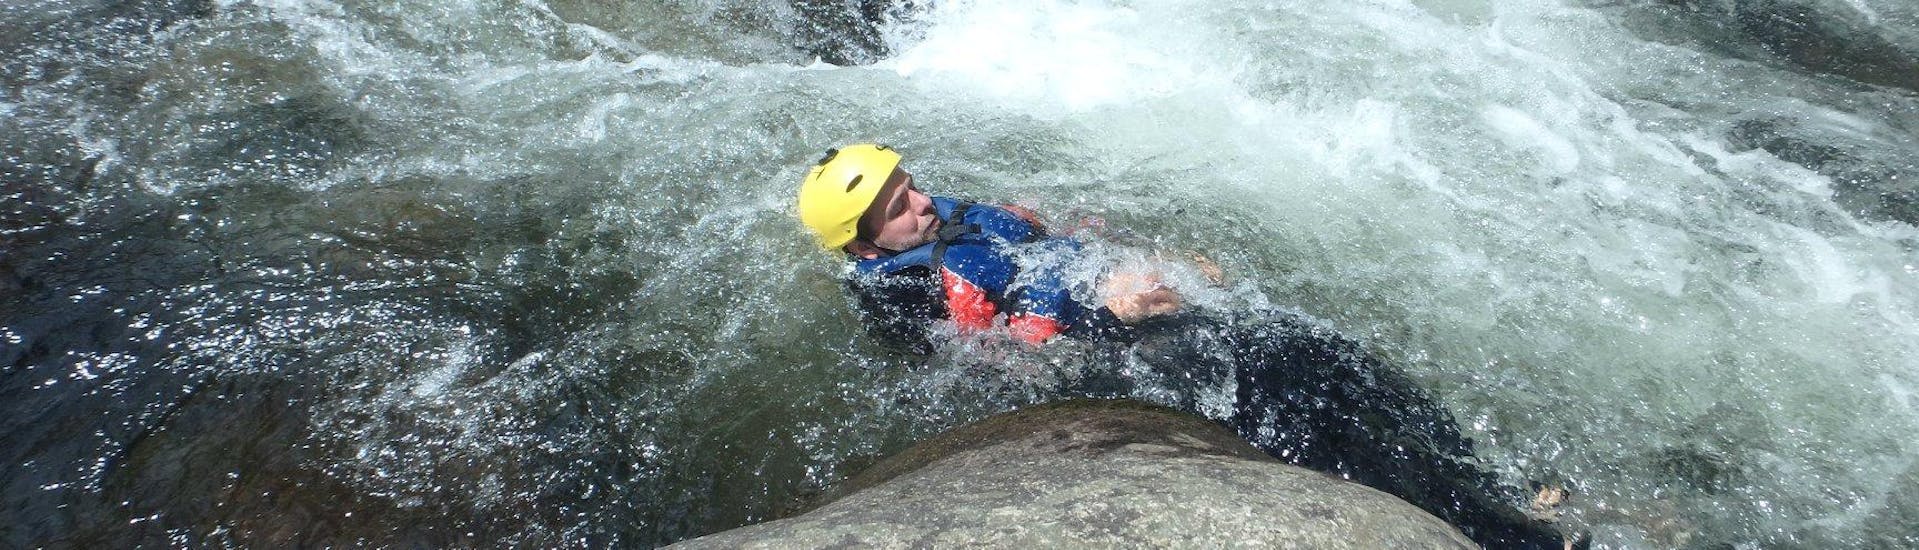 Canyoning sportif à Arouca - Arouca Geopark.